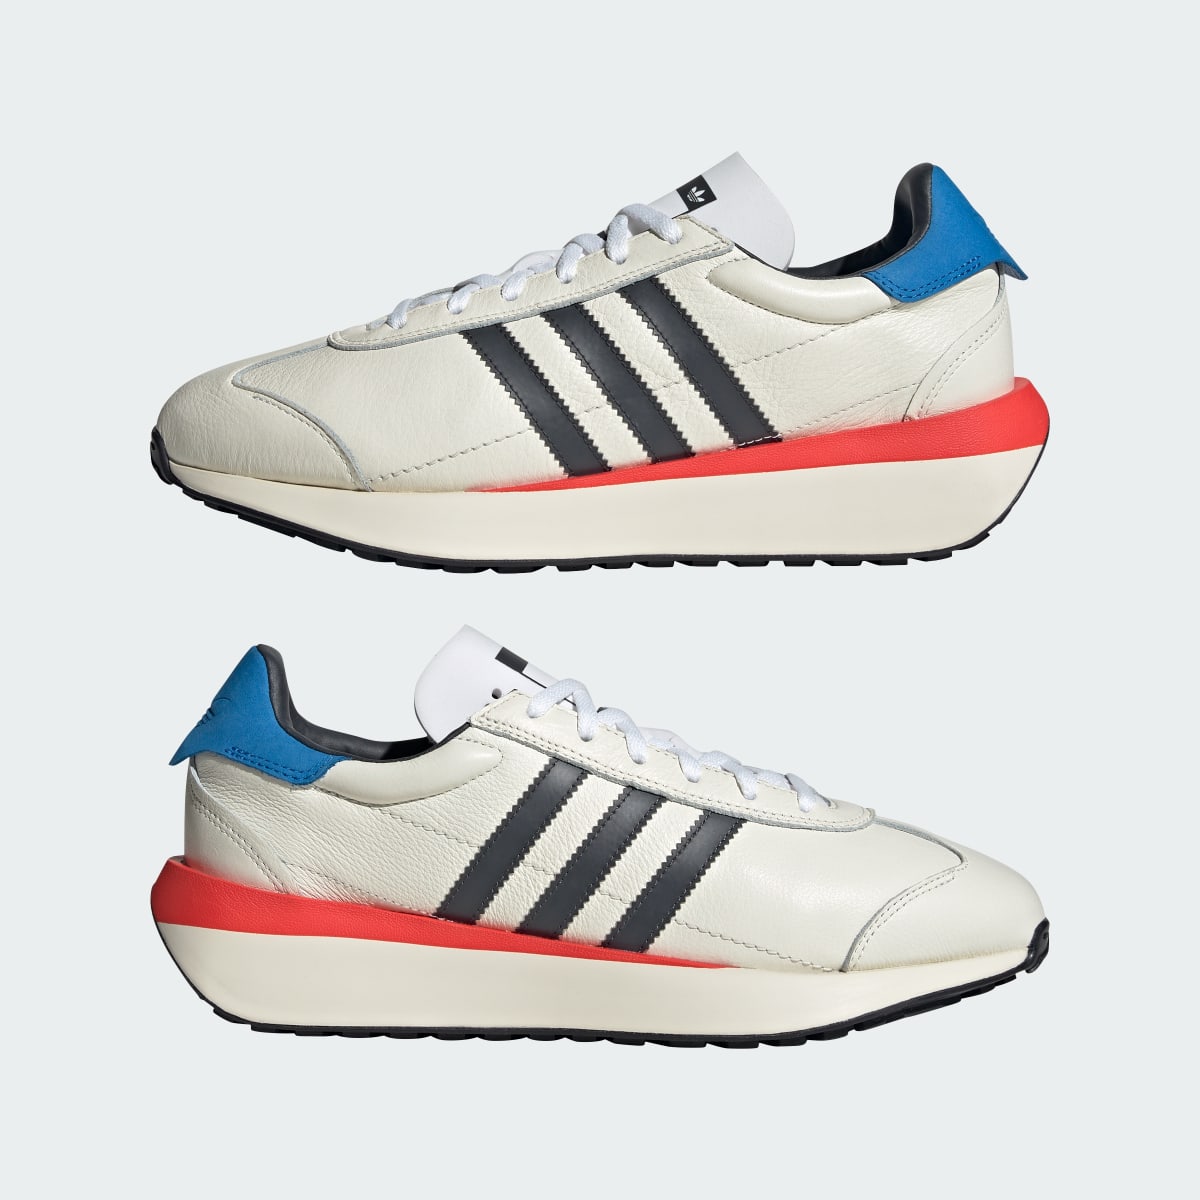 Adidas Chaussure Country XLG. 11